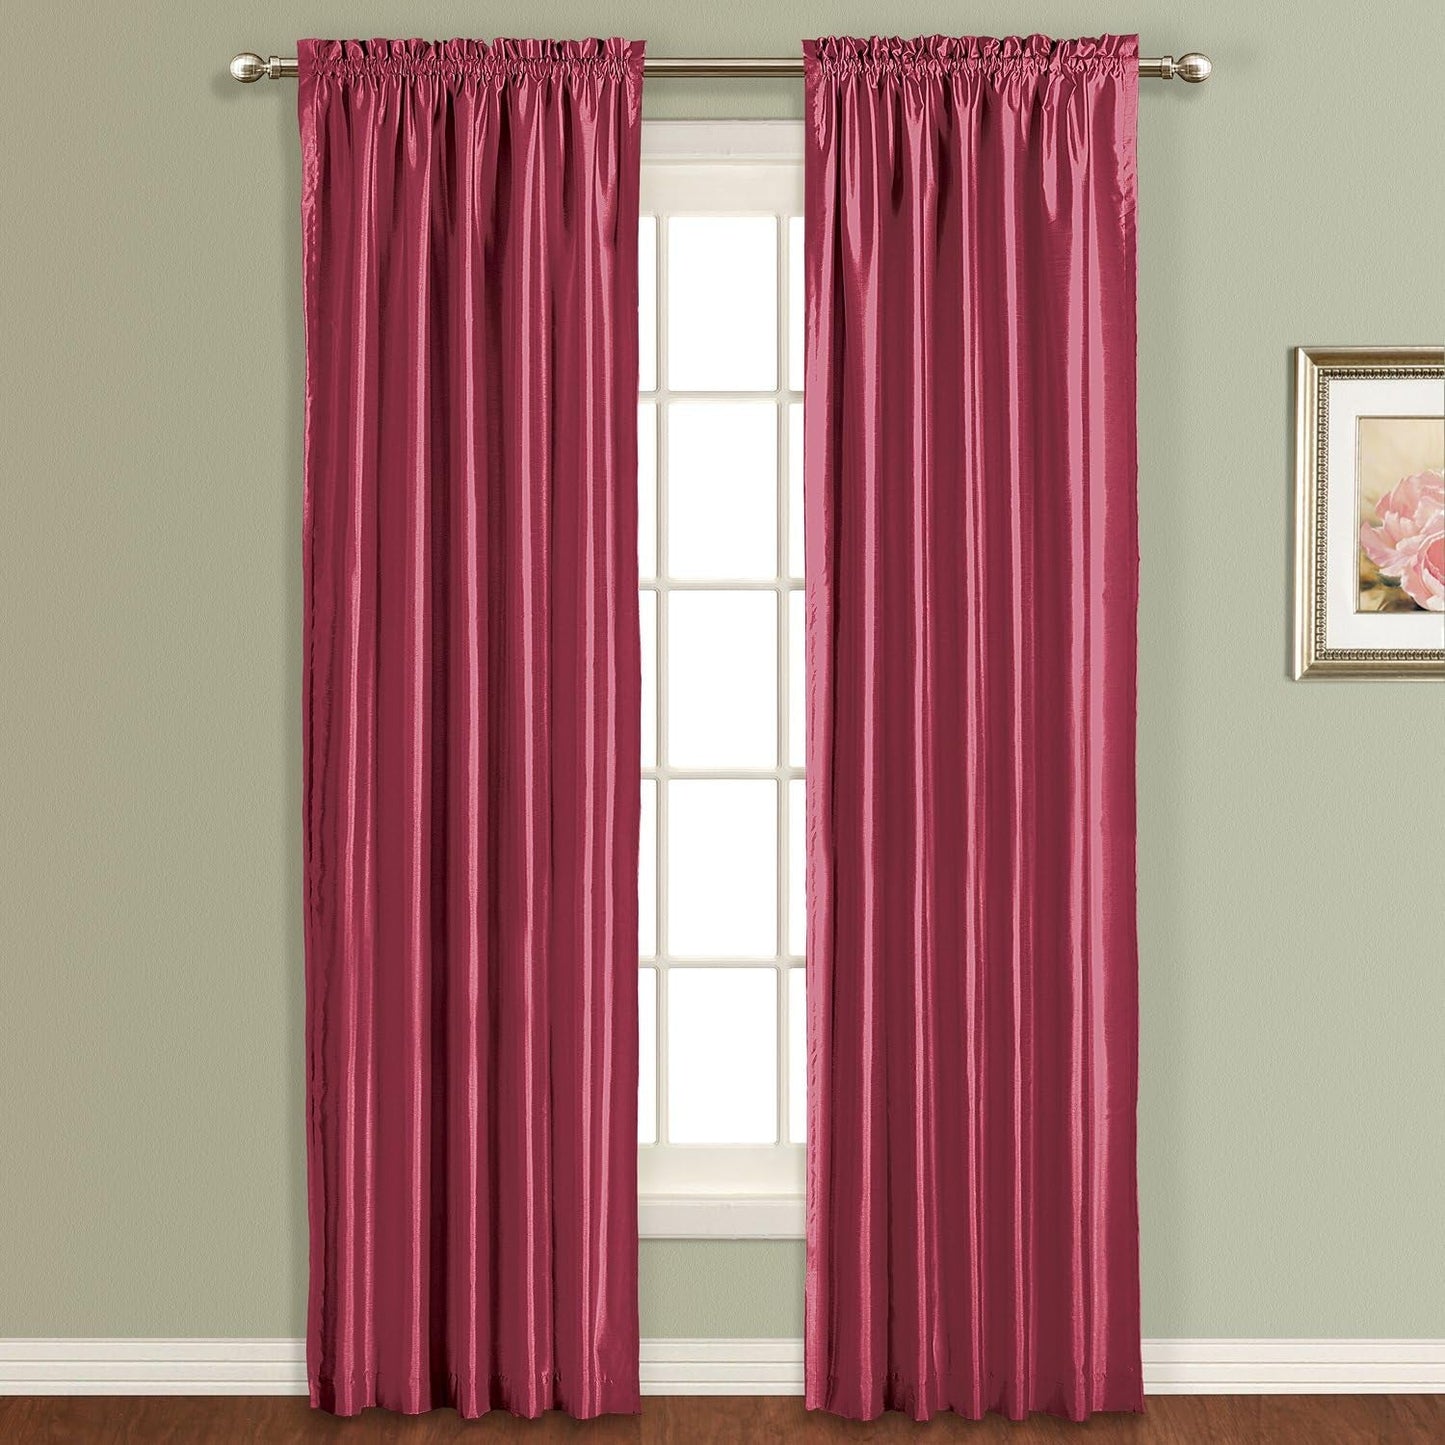 Kathryn Straight Window Treatment Valance, 54-Inch by 16-Inch, Taupe